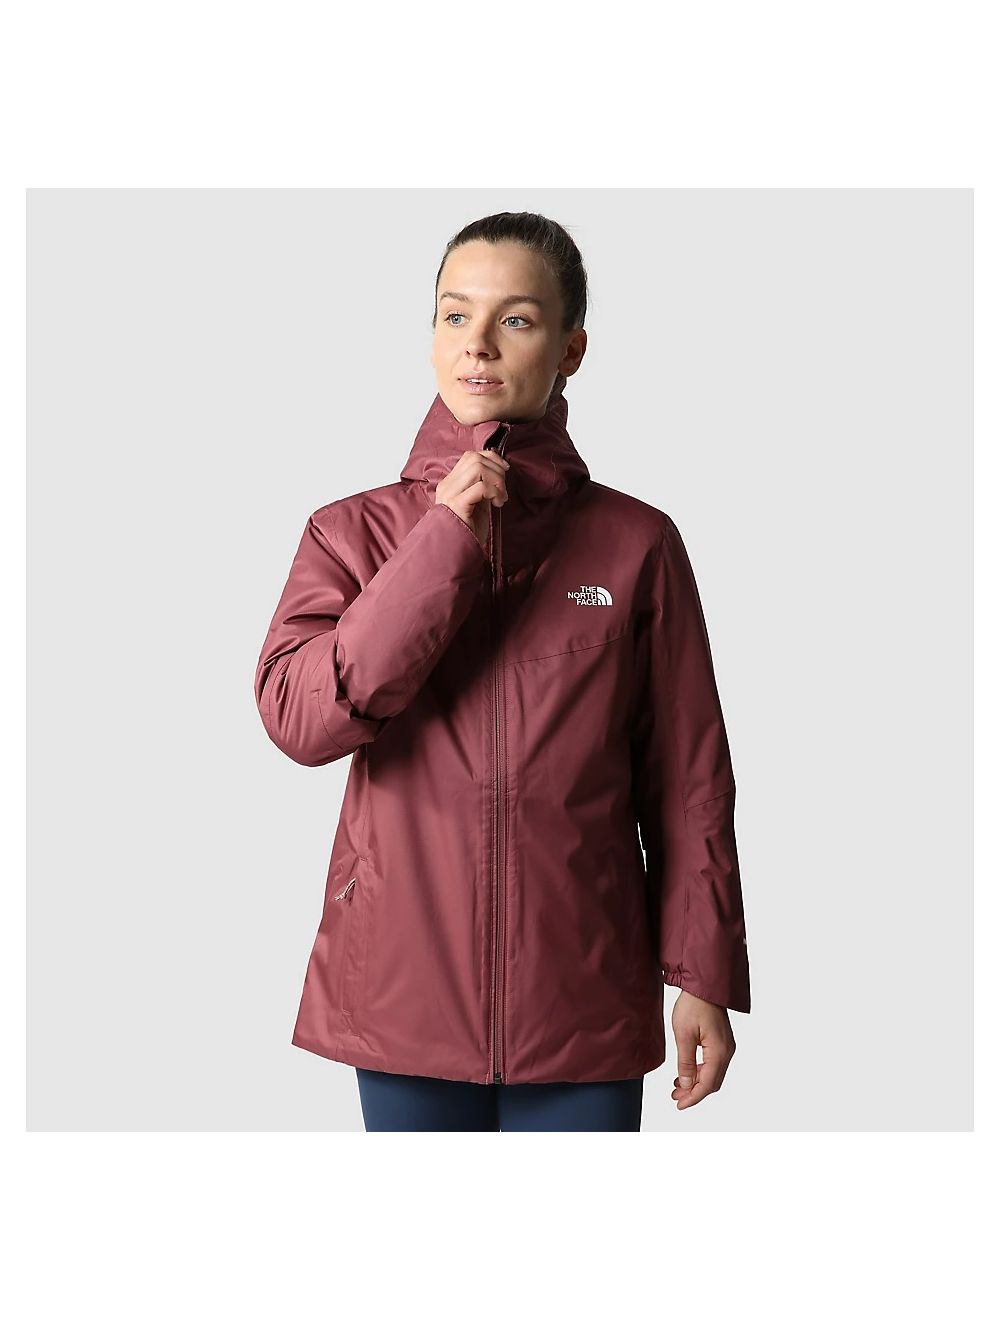 The W Quest Insulated Jacket